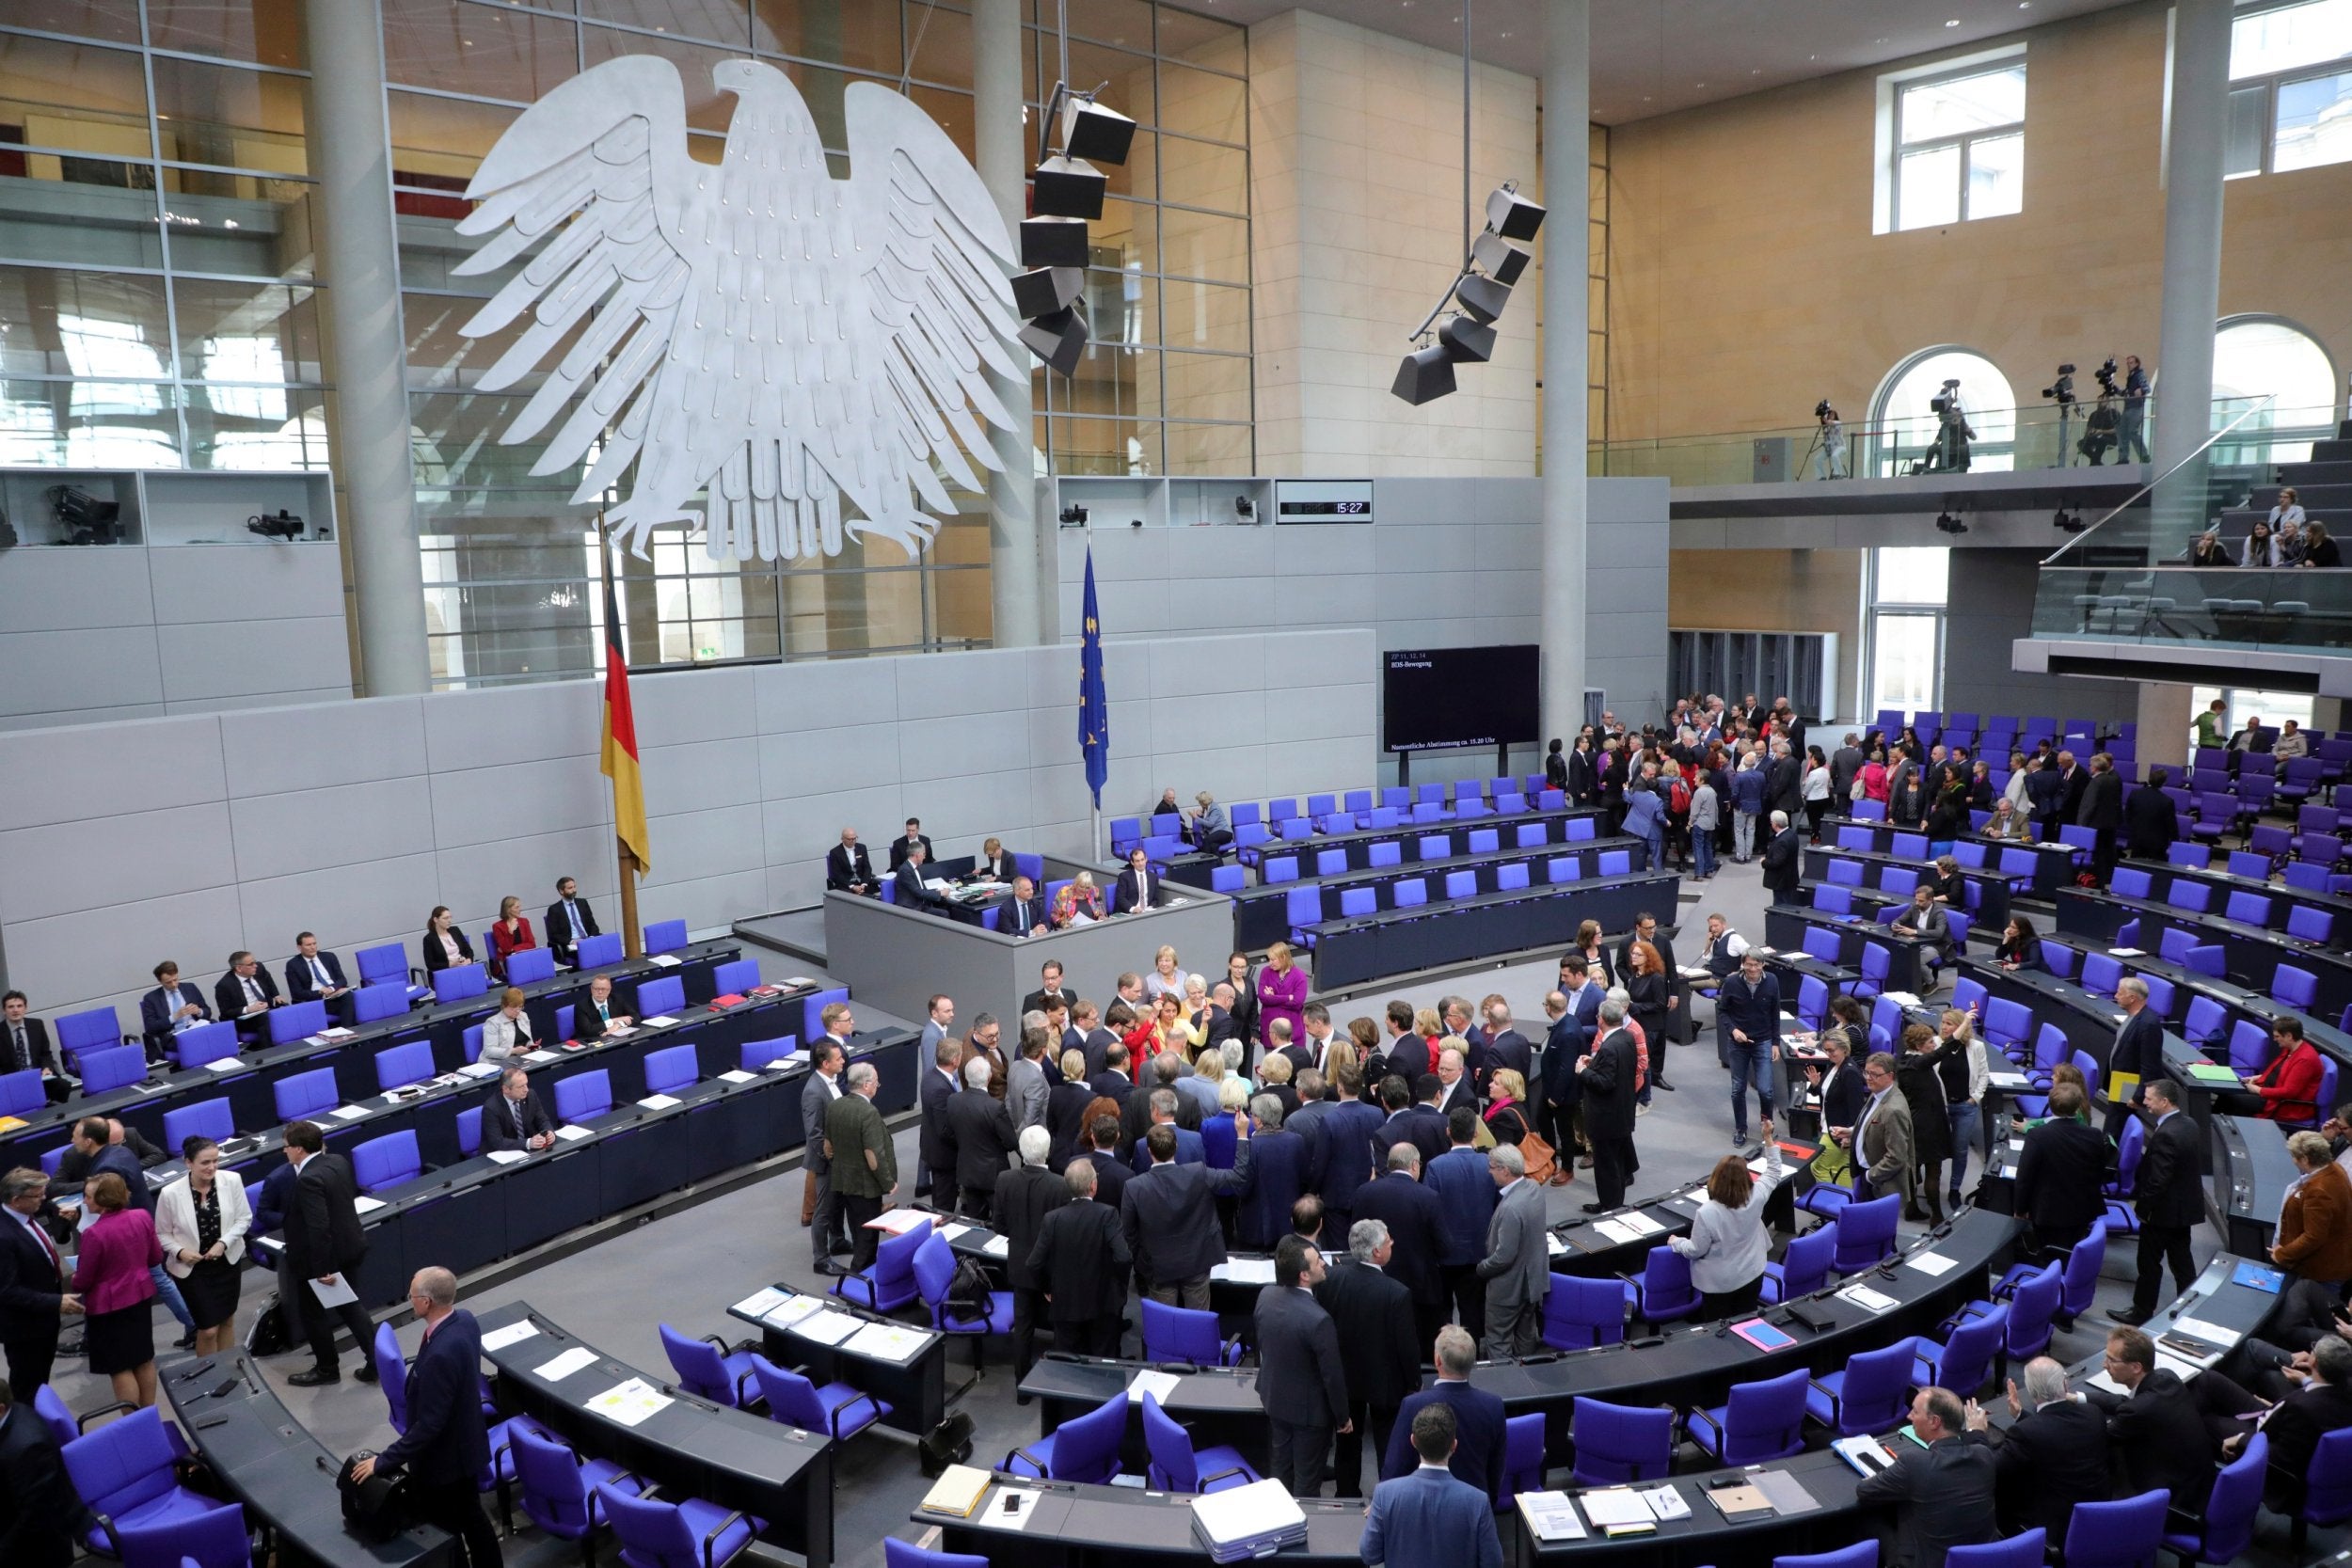 The German federal parliament, Bundestag, at the Reichstag building in Berlin, Germany.